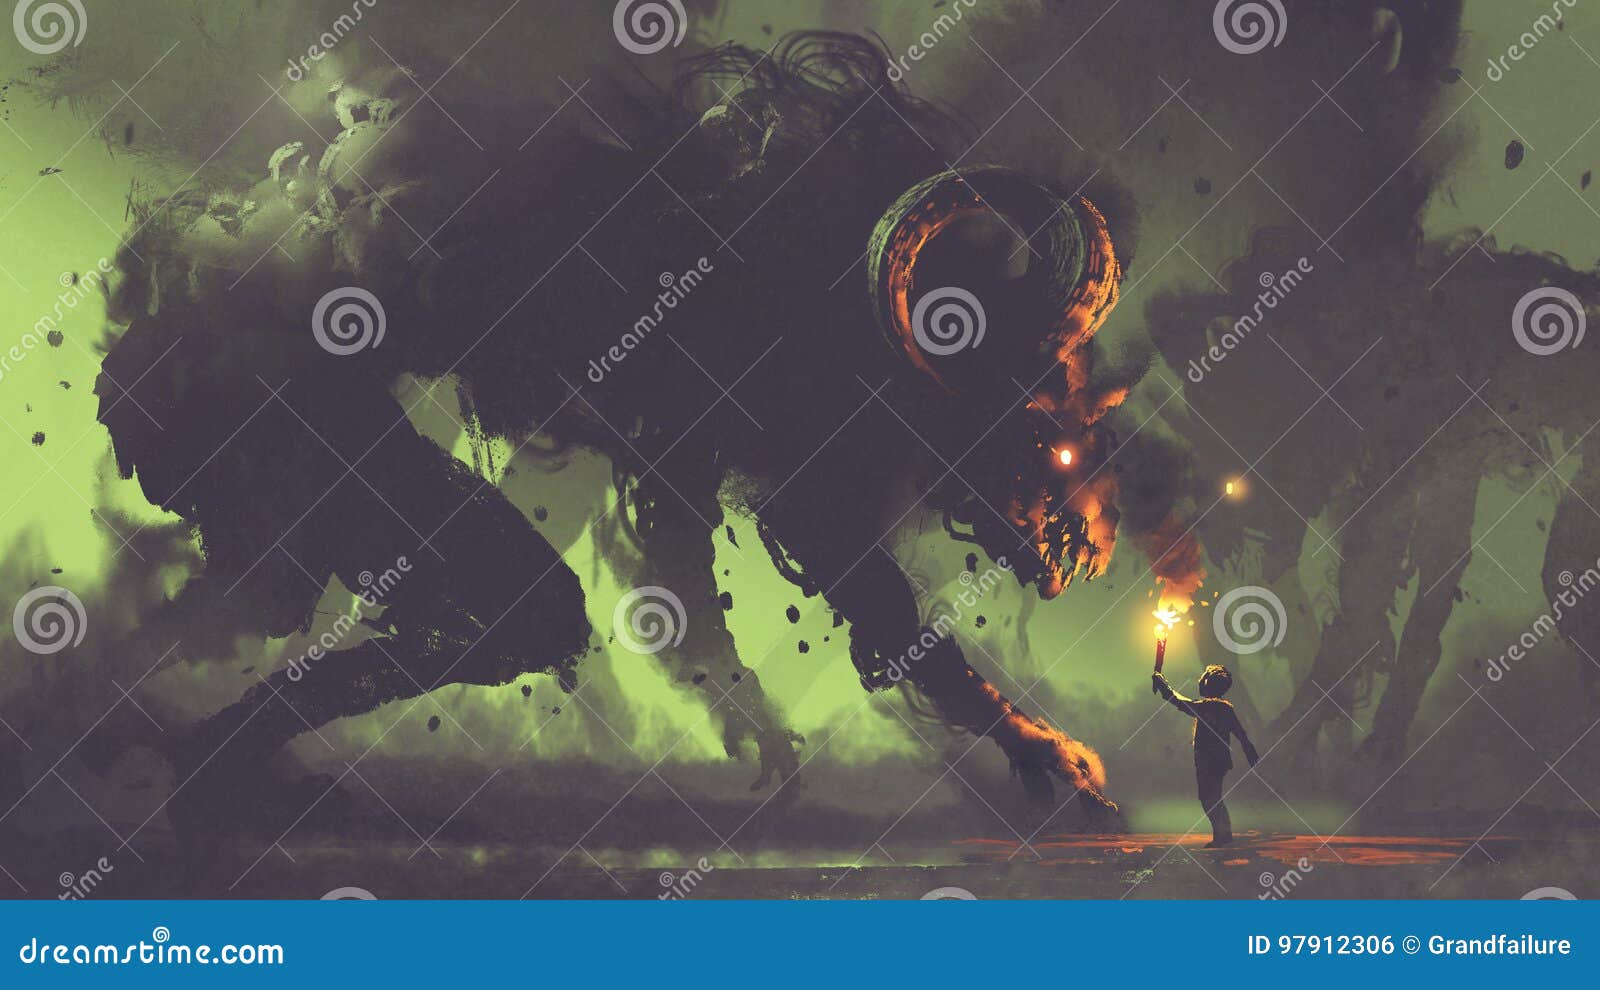 boy with a torch facing smoke monsters